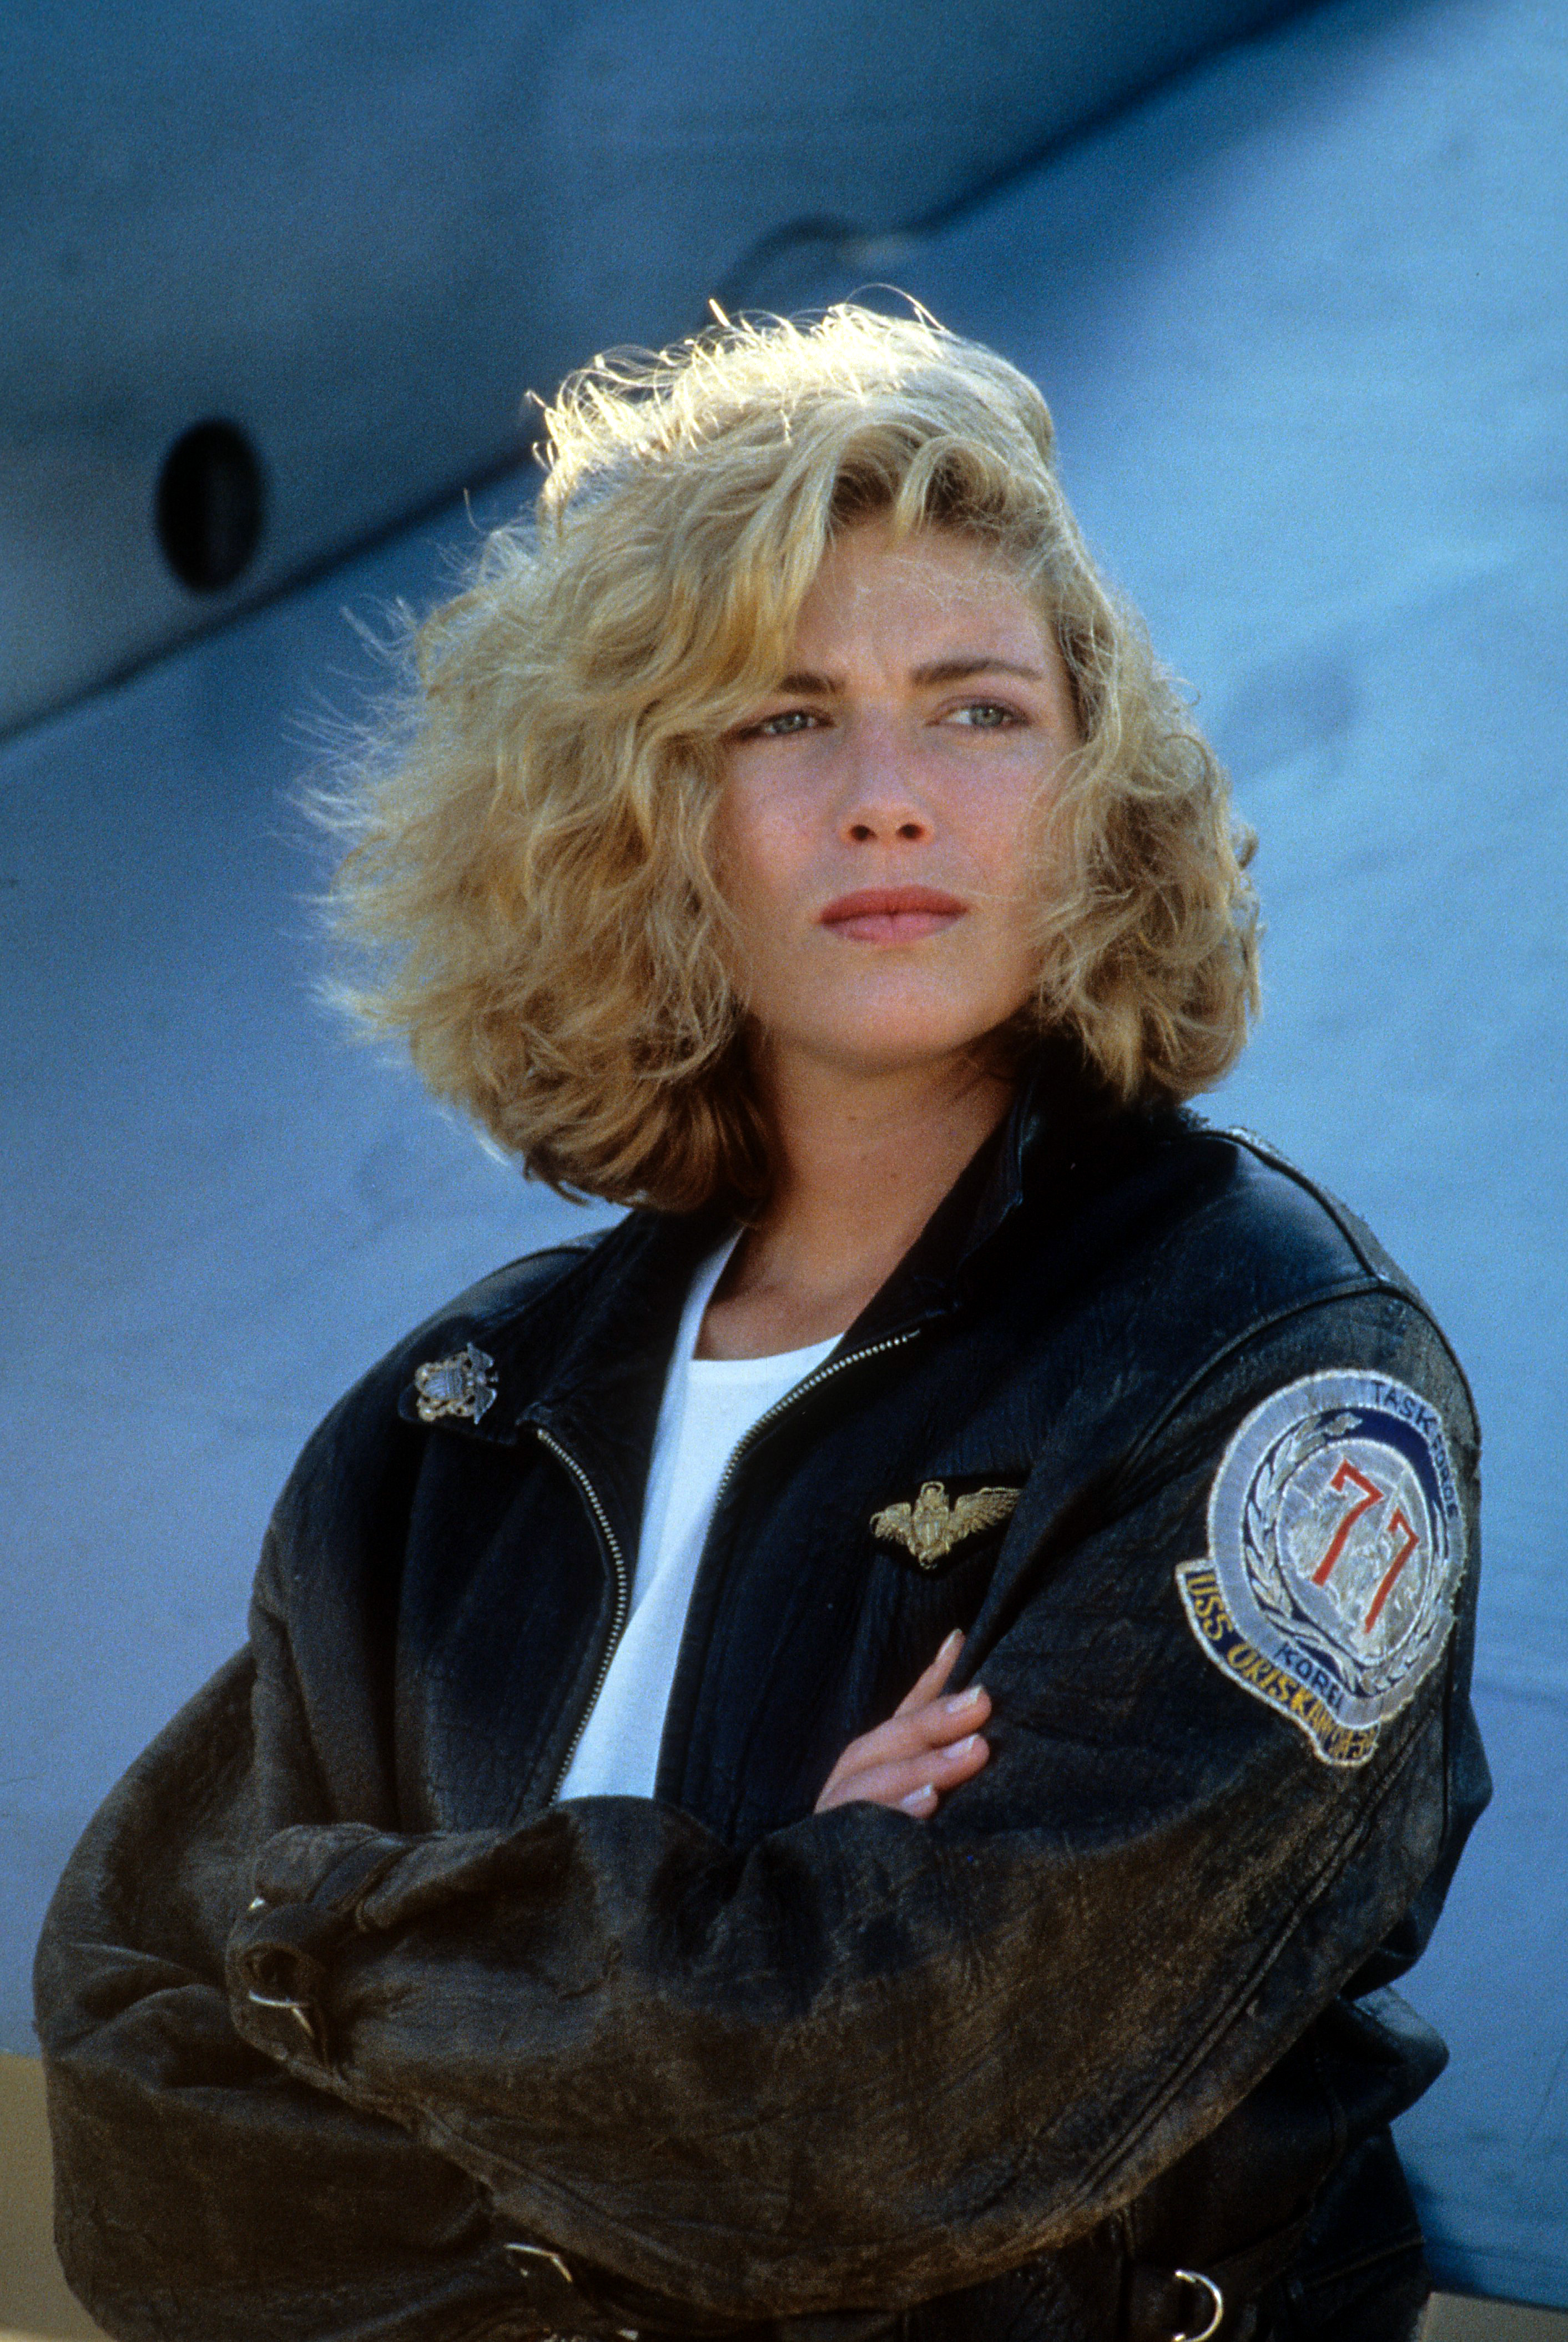 Kelly McGillis in a scene from "Top Gun" in 1986 | Source: Getty Images